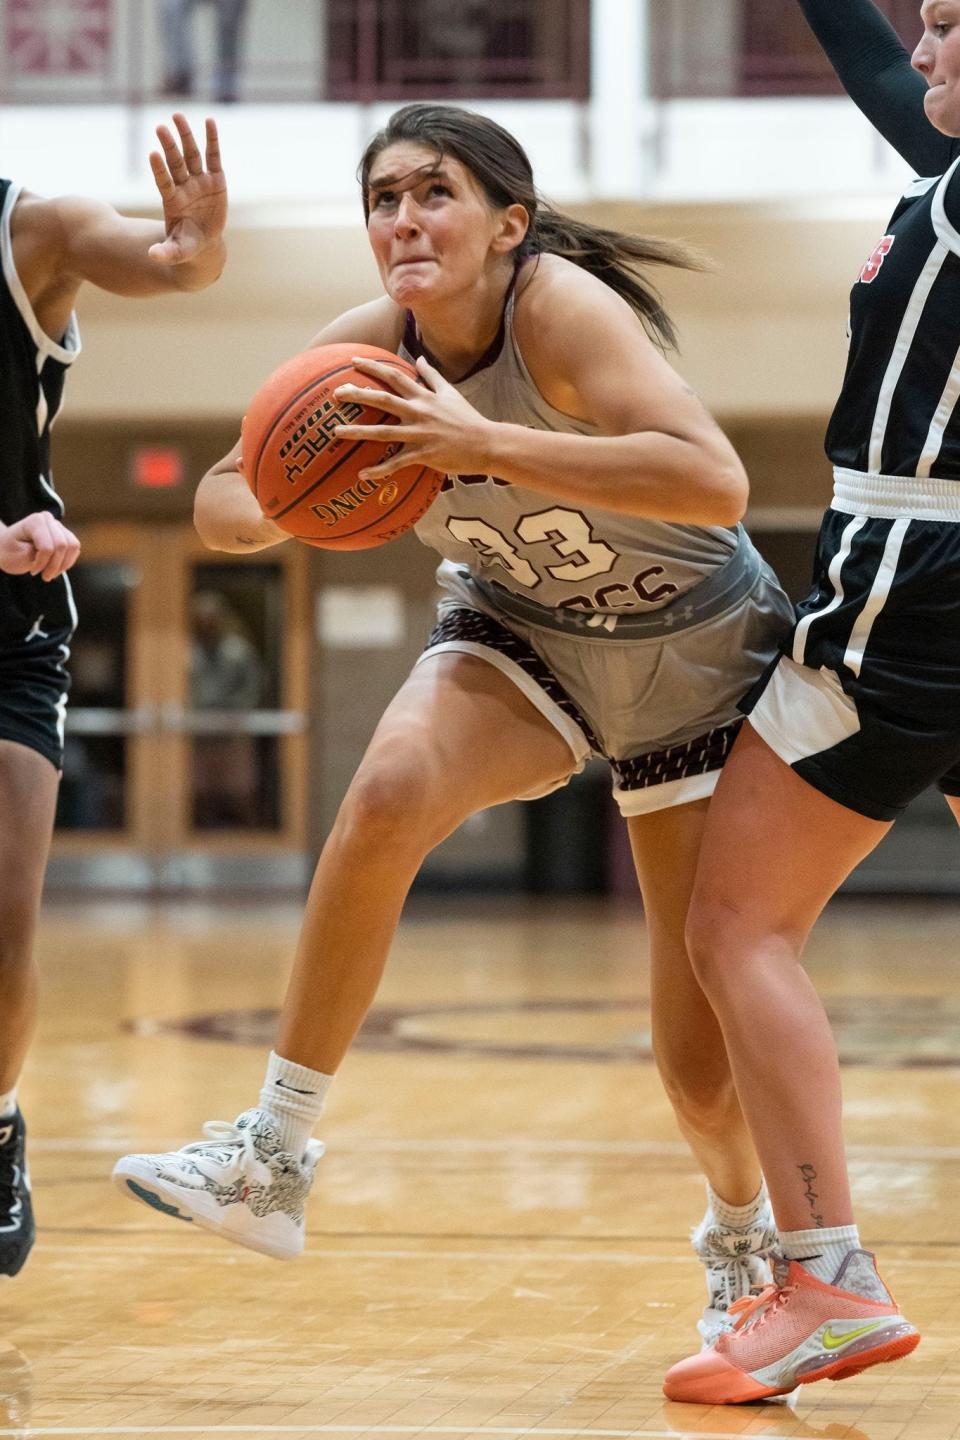 Former Penn player Grace Adams is part of a trio of former local prep talent helping the Holy Cross women's basketball team to new heights this season.